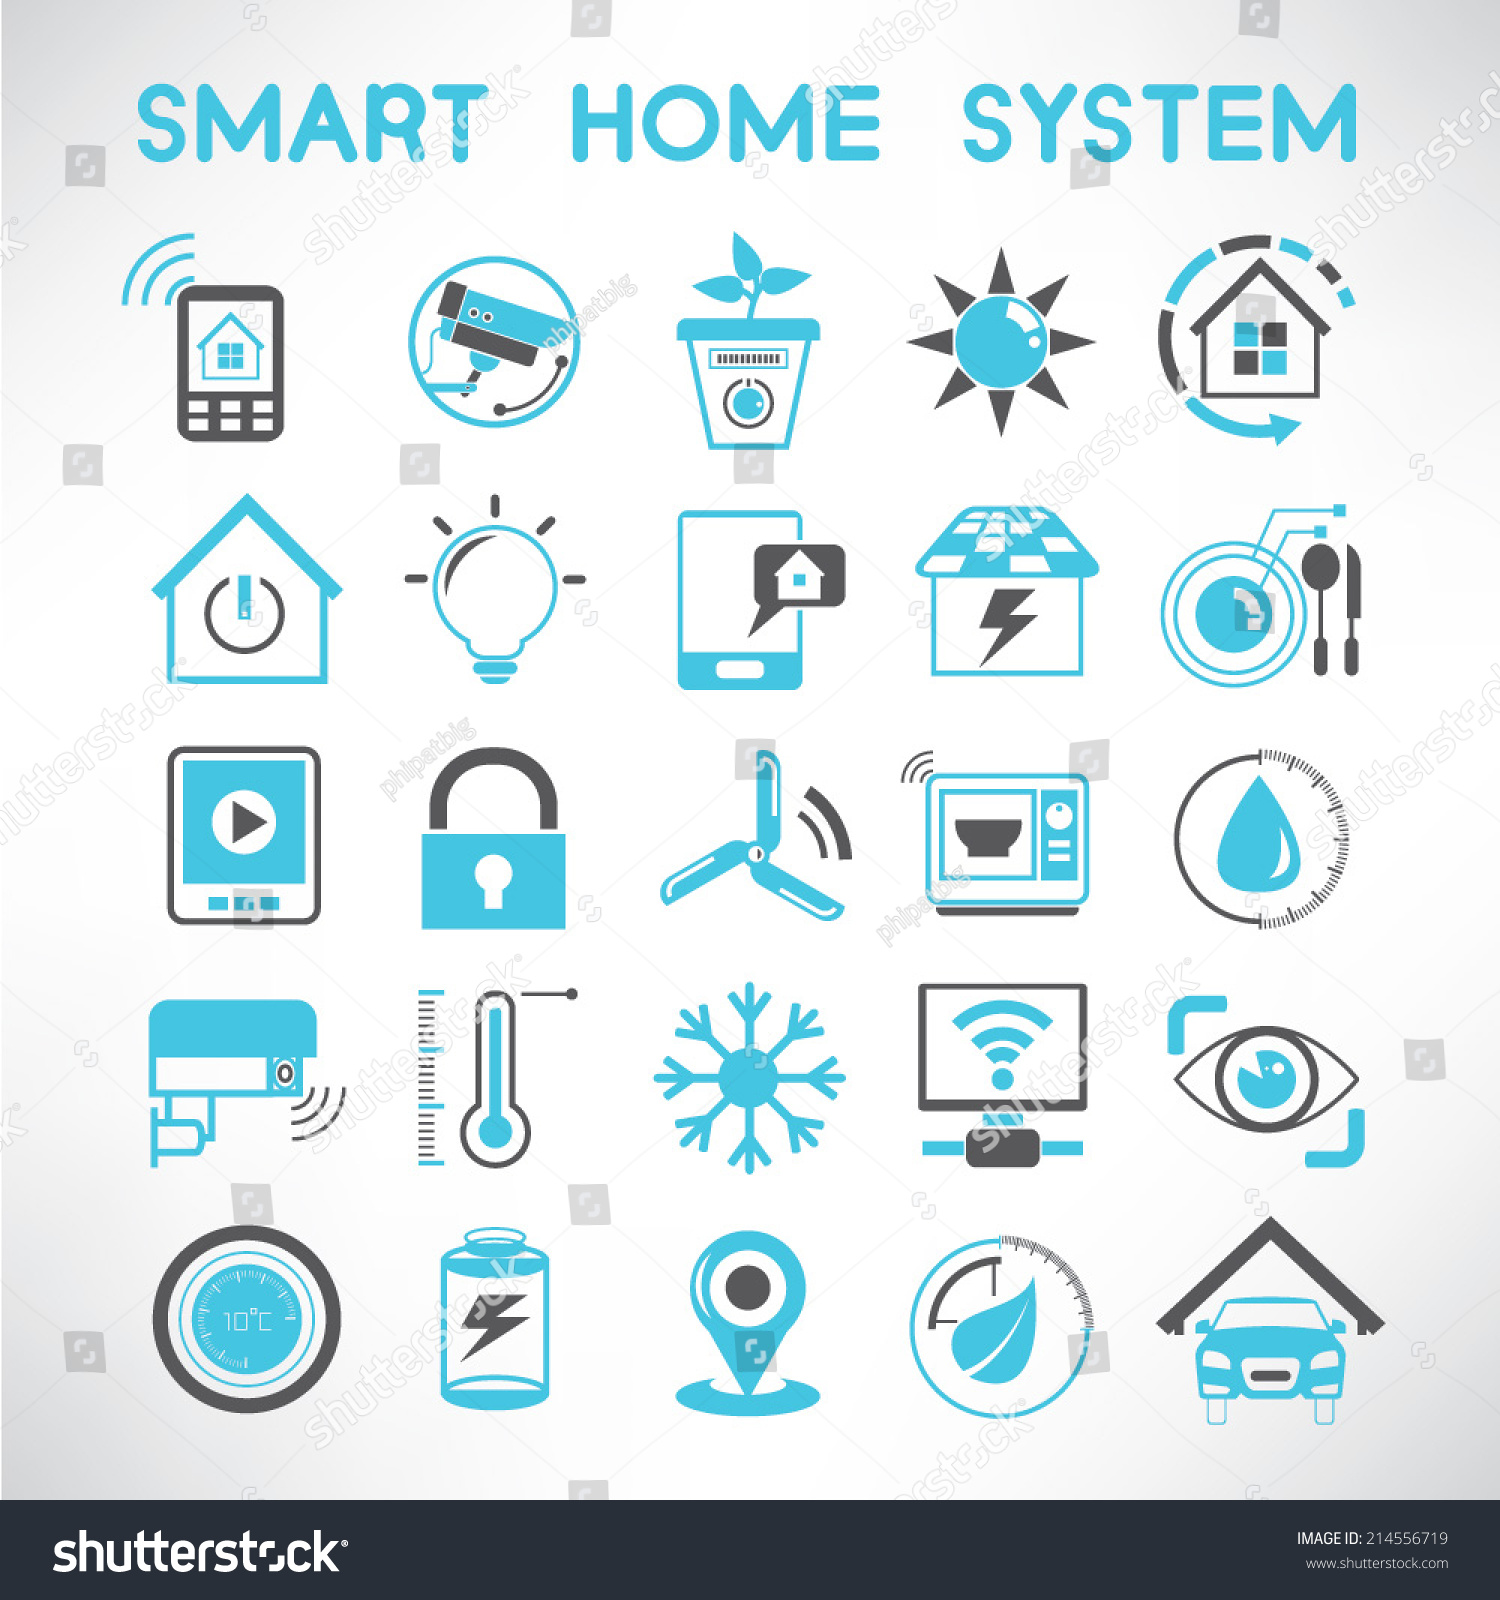 Smart Home Icon for Remote Network Management Solutions - Domotz 